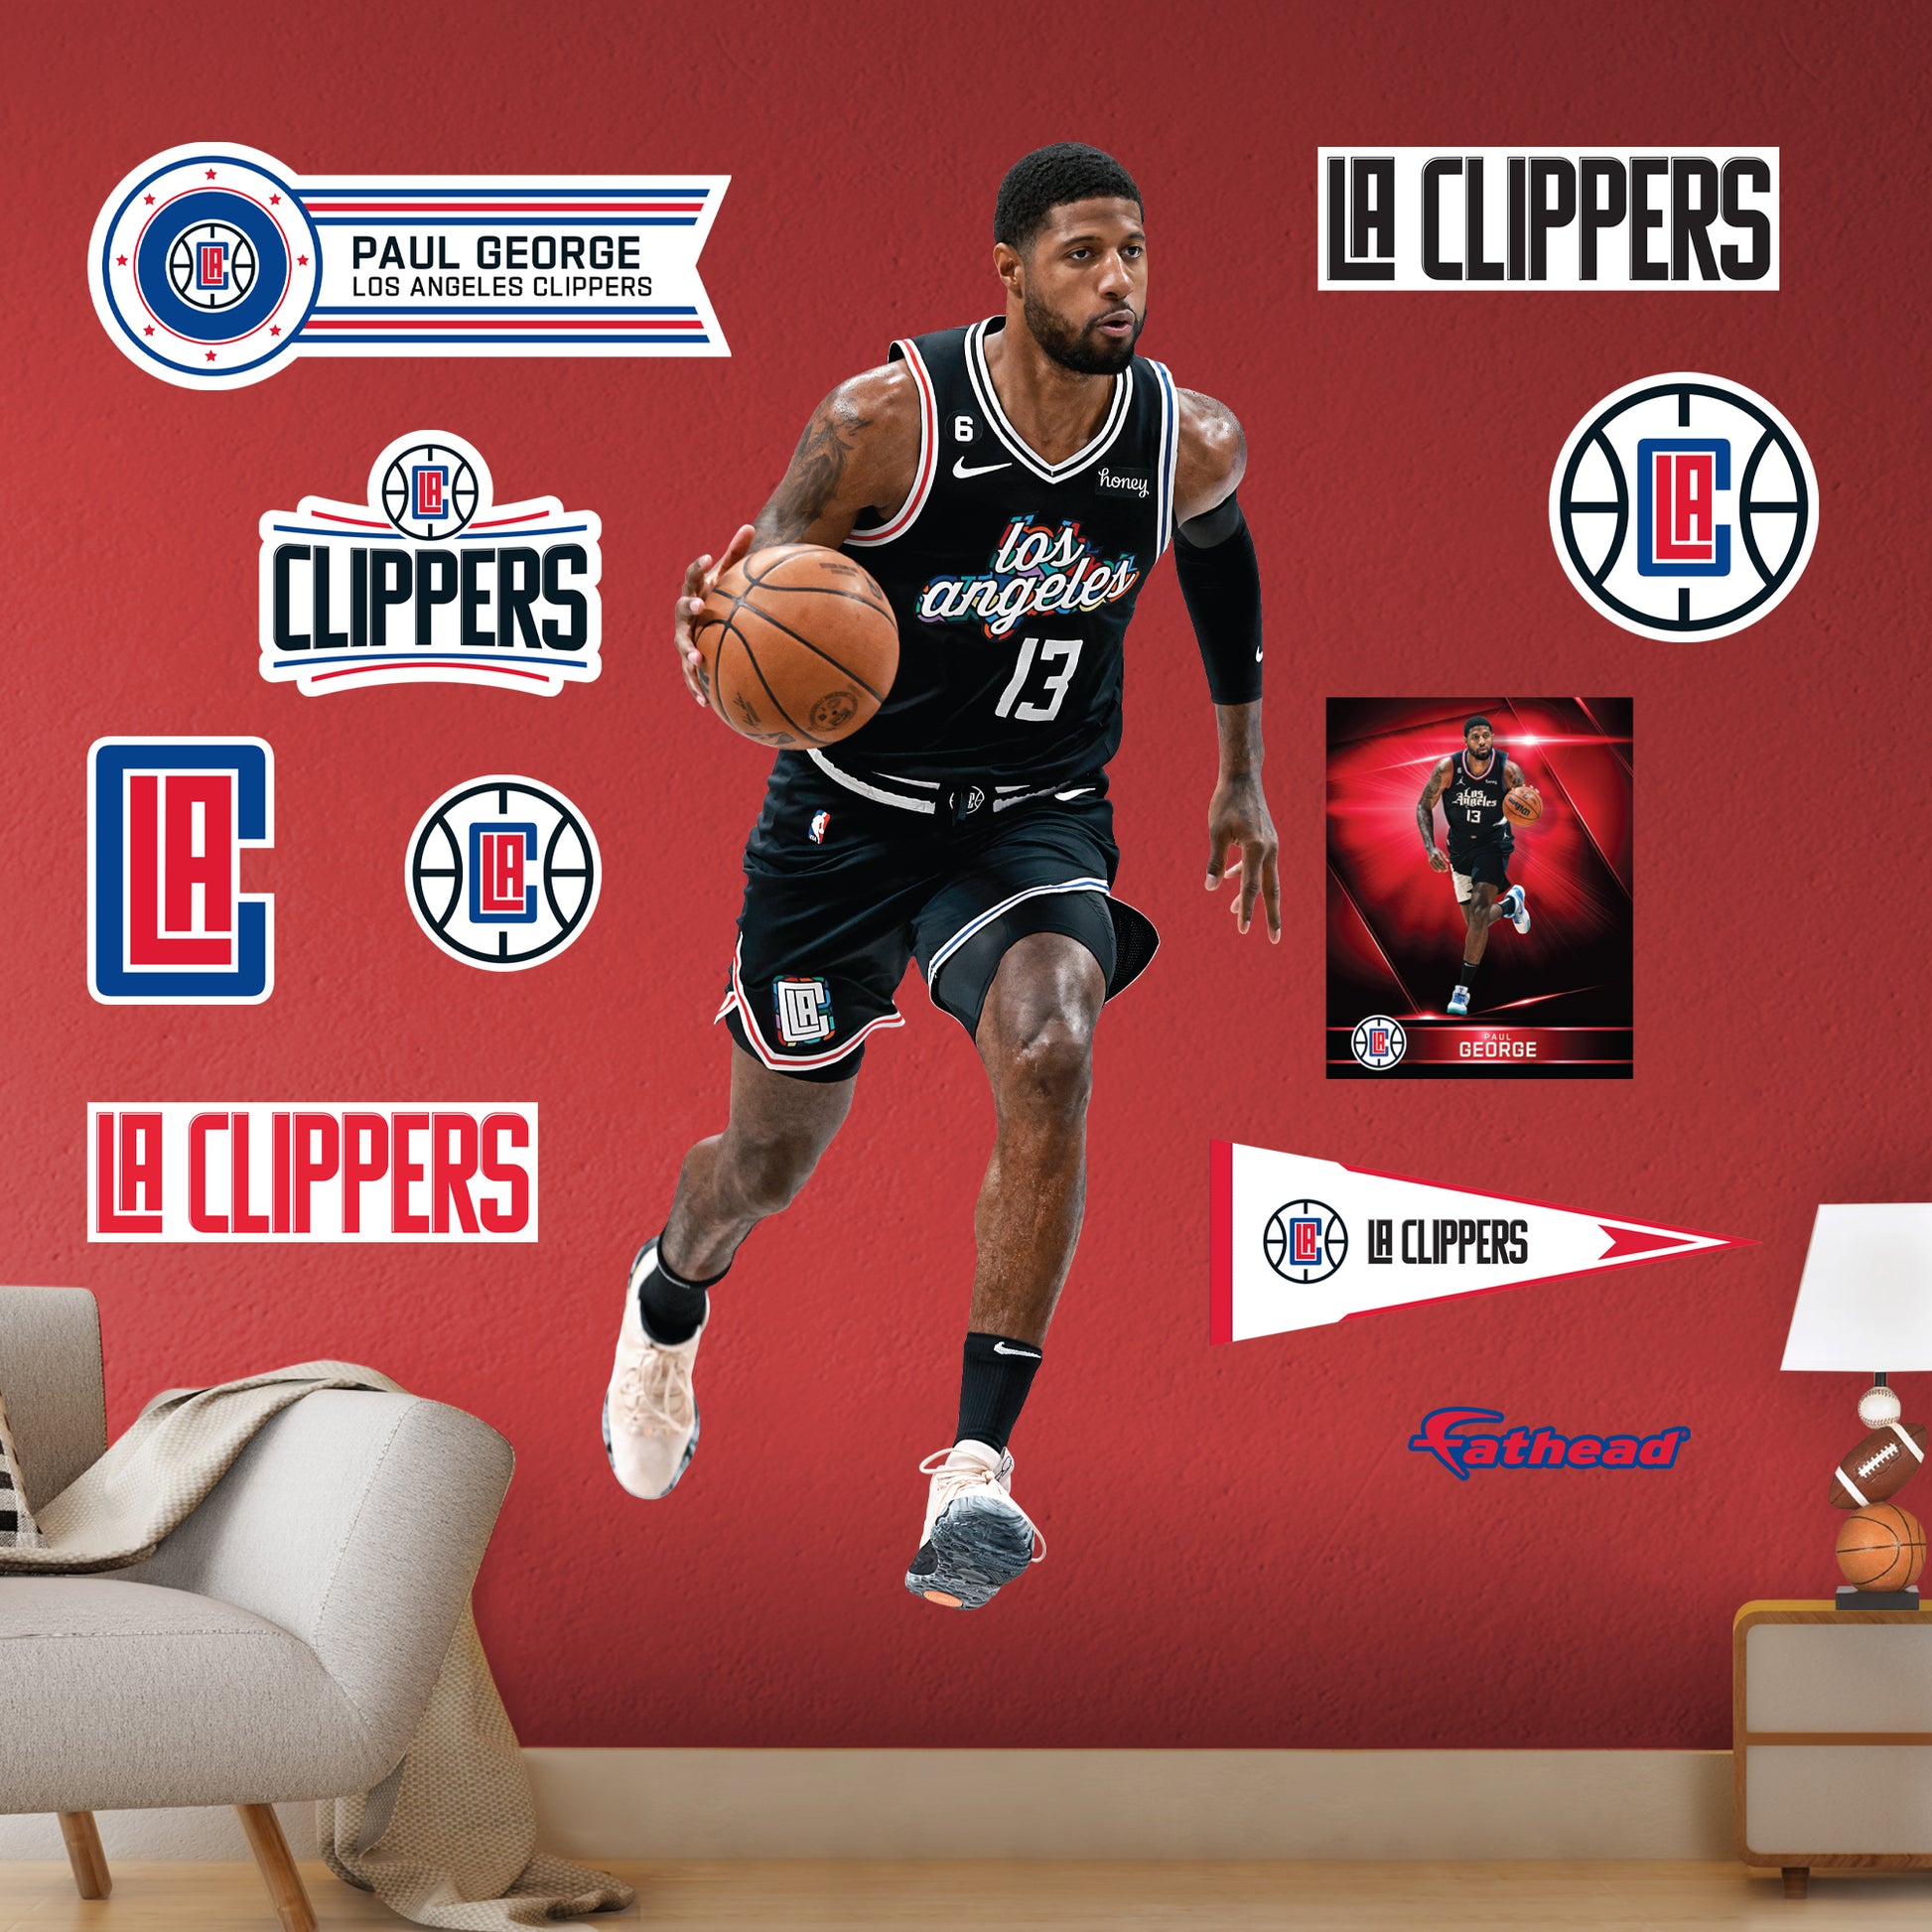 Clippers 'City' jerseys debut on Sports Illustrated cover - Sports